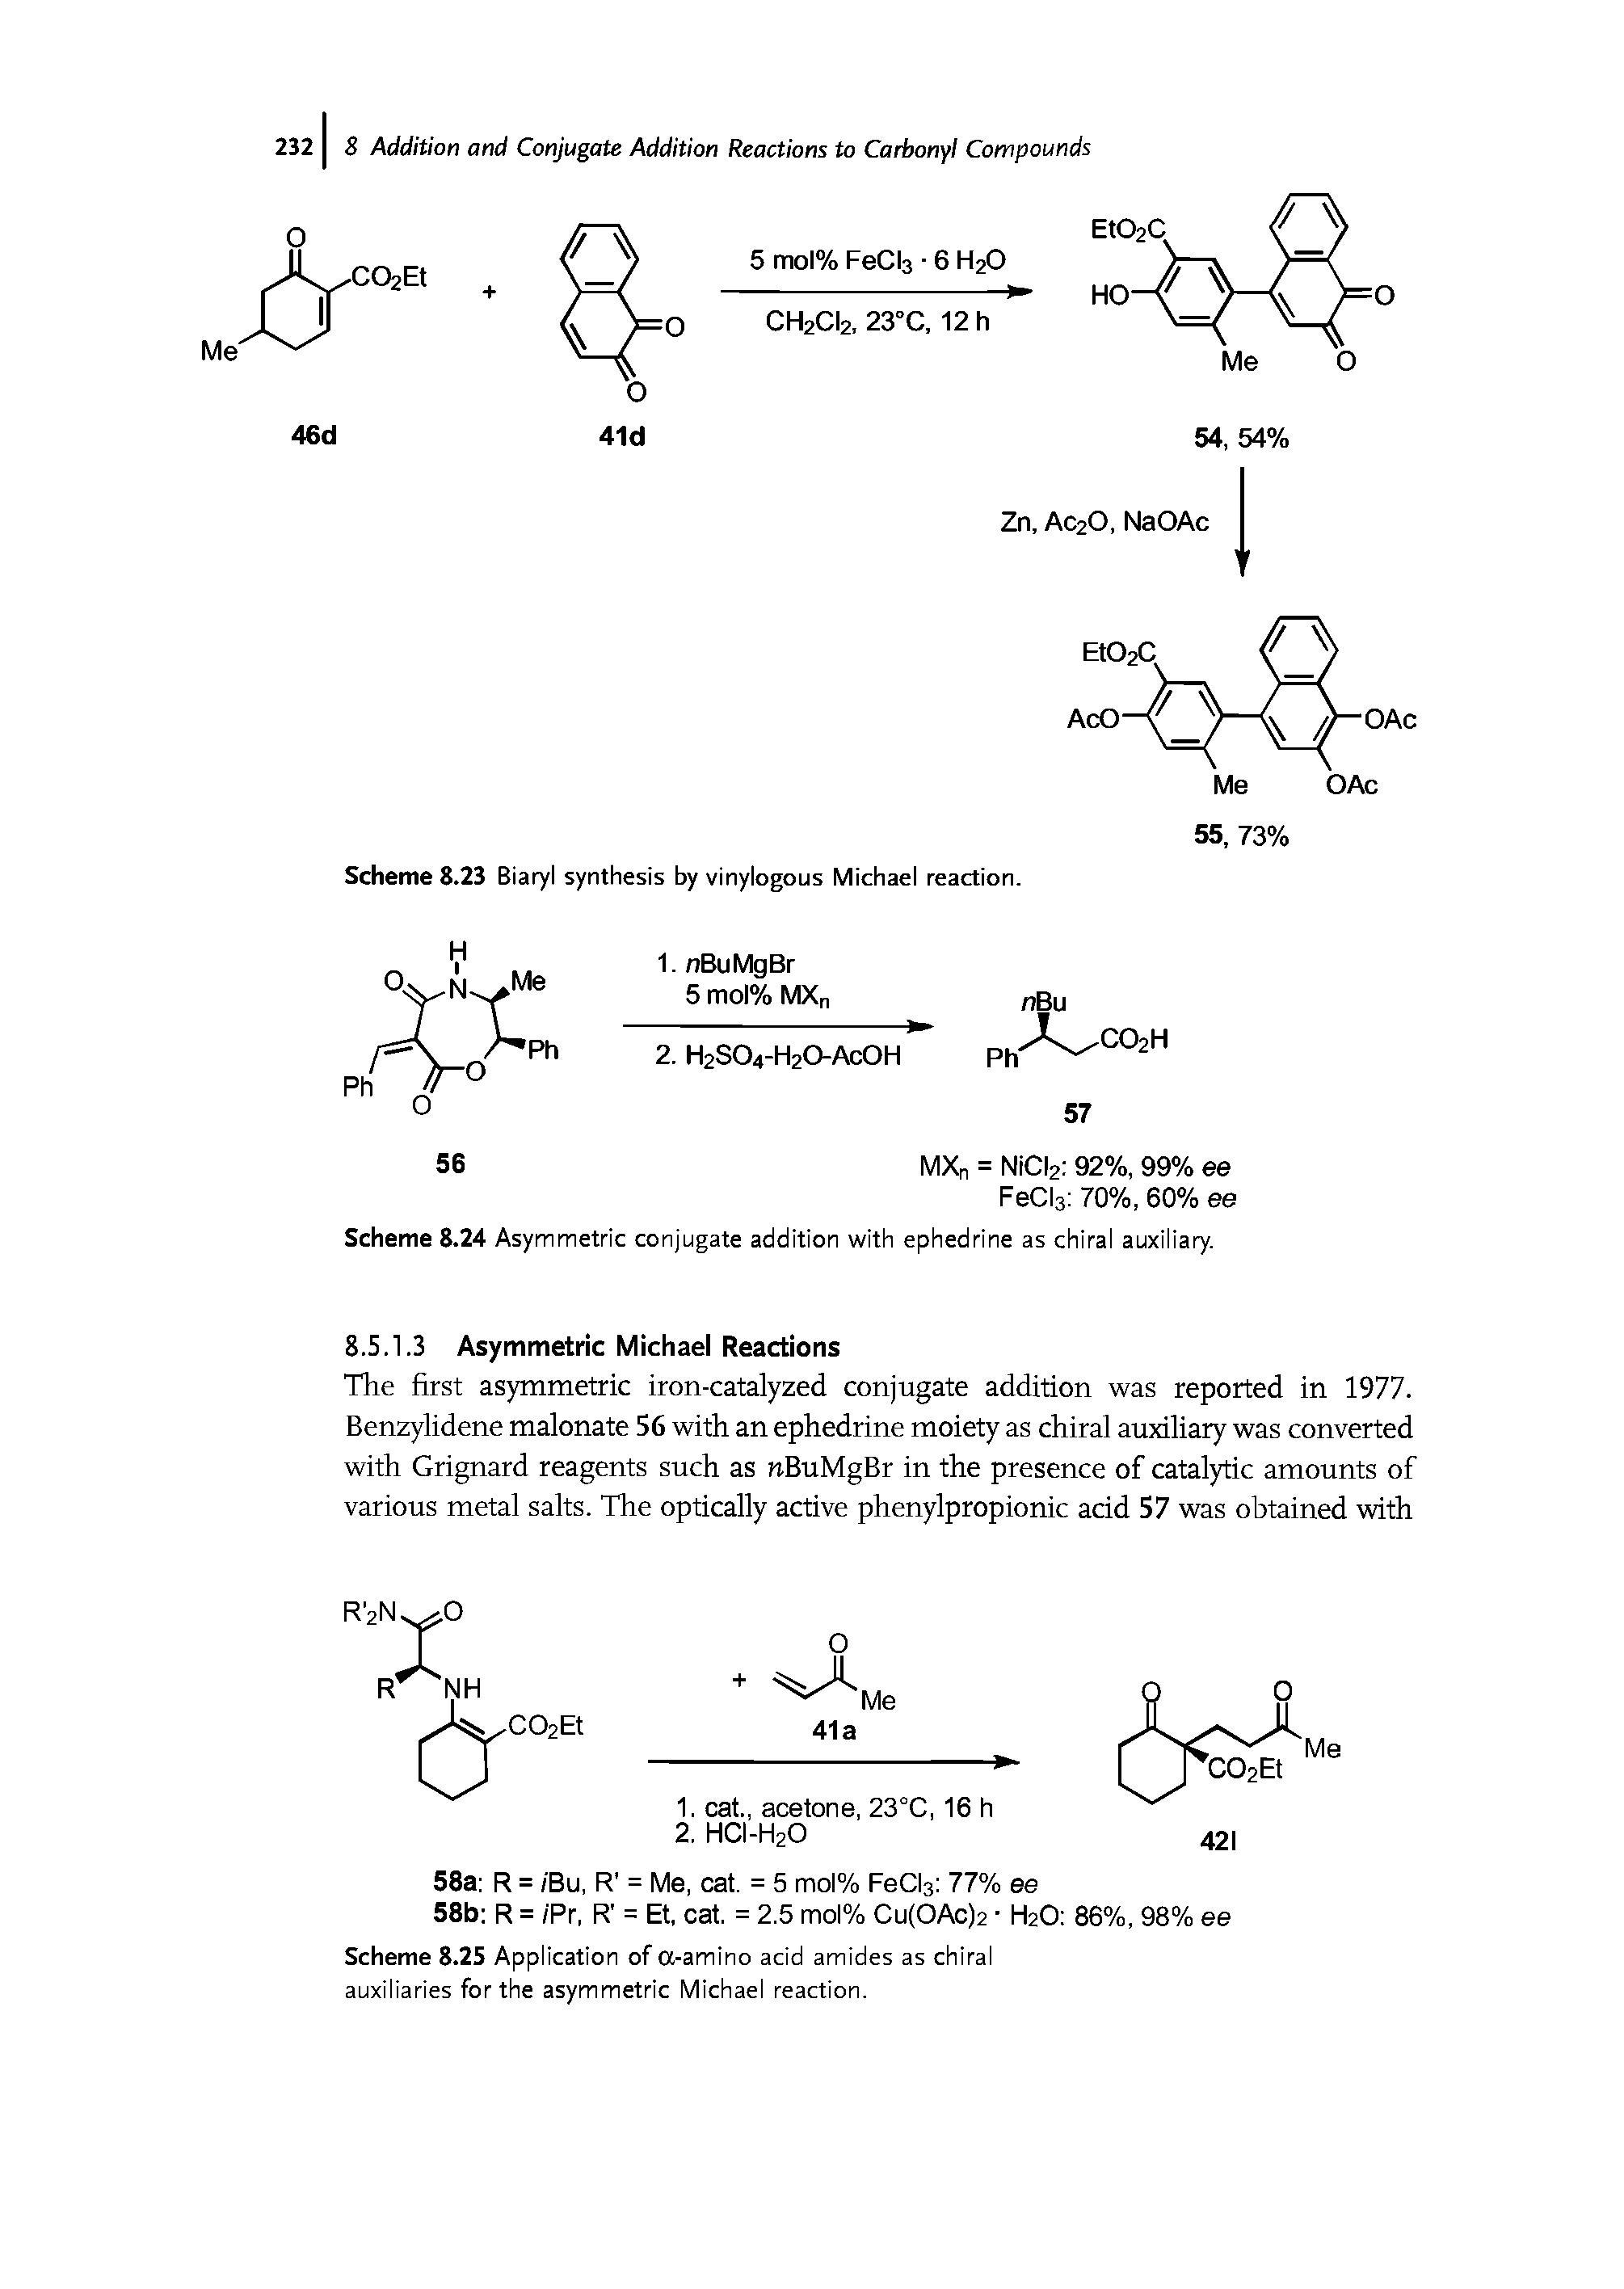 Scheme 8.25 Application of a-amino acid amides as chiral auxiliaries for the asymmetric Michael reaction.